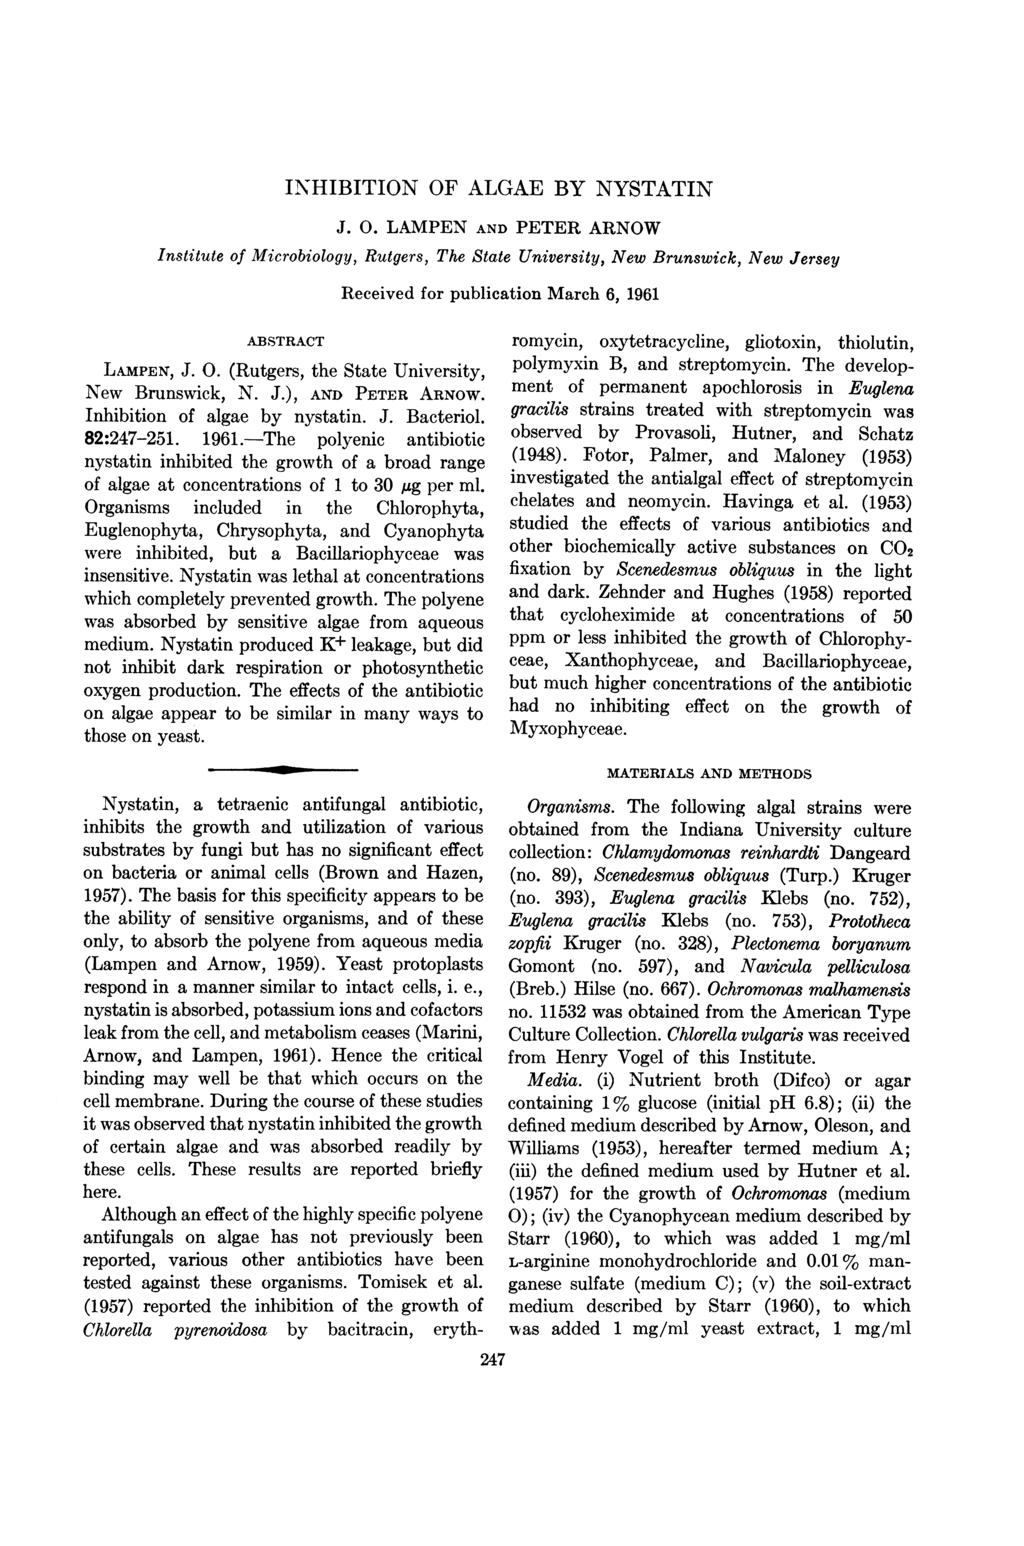 INHIBITION OF ALGAE BY NYSTATIN J. 0. LAMPEN AND PETER ARNOW Institute of Microbiology, Rutgers, The State University, New Brunswick, New Jersey ABSTRACT LAMPEN, J. 0. (Rutgers, the State University, New Brunswick, N.